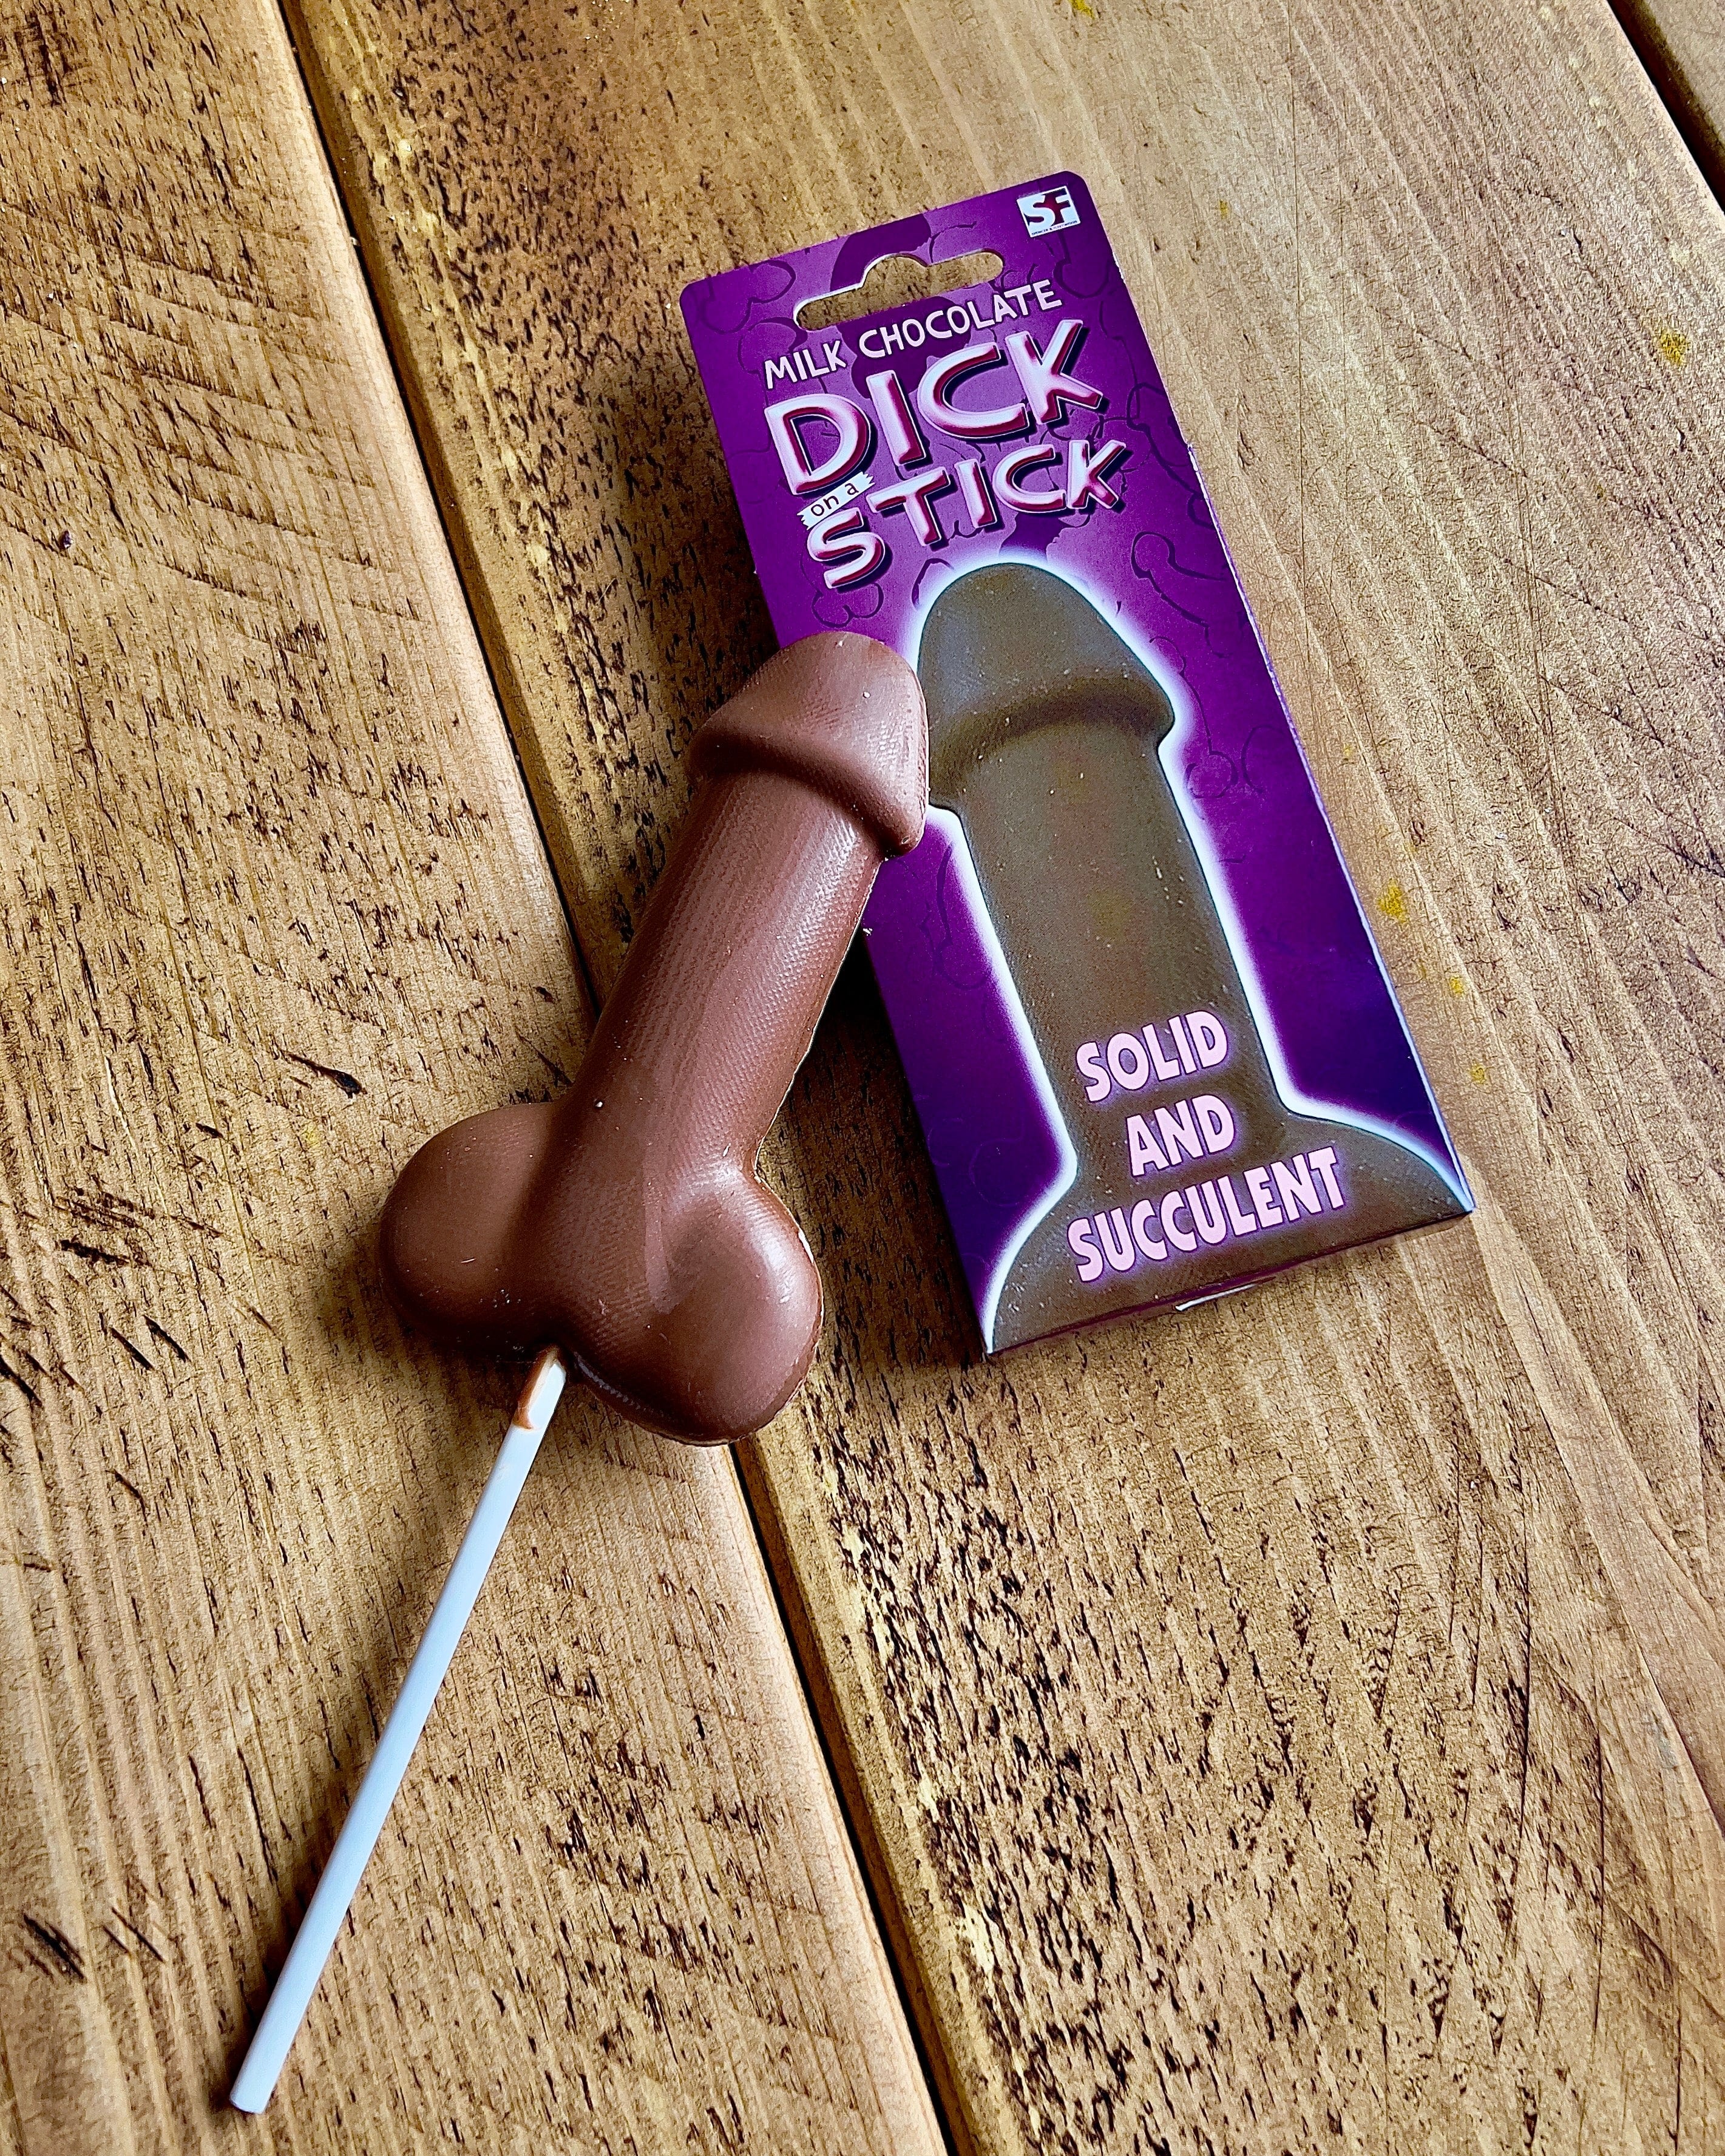 Dick on a stick - Teddy Eva Scents adult snacks